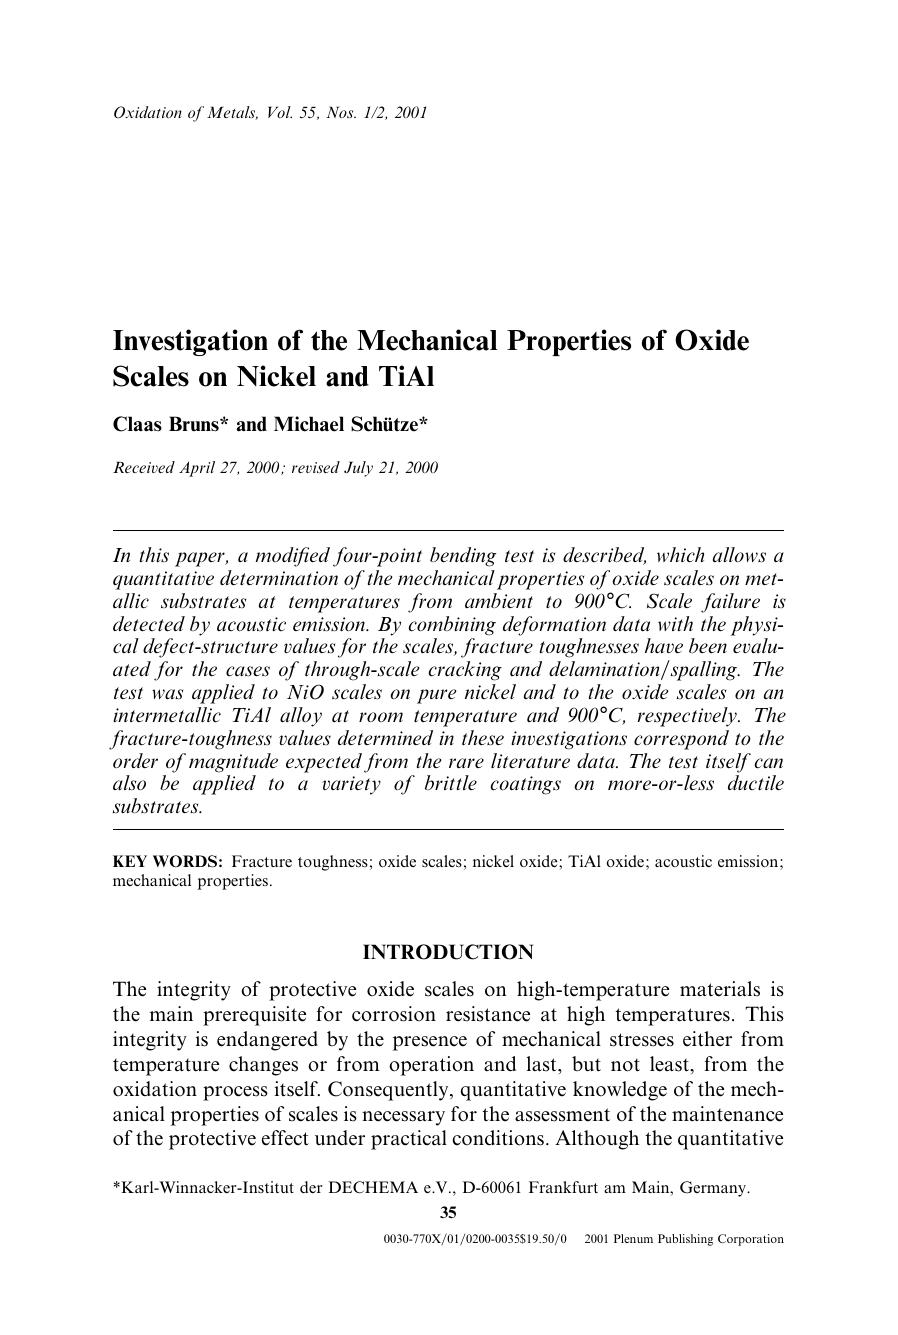 Investigation of the Mechanical Properties of Oxide Scales on Nickel and TiAl by Unknown